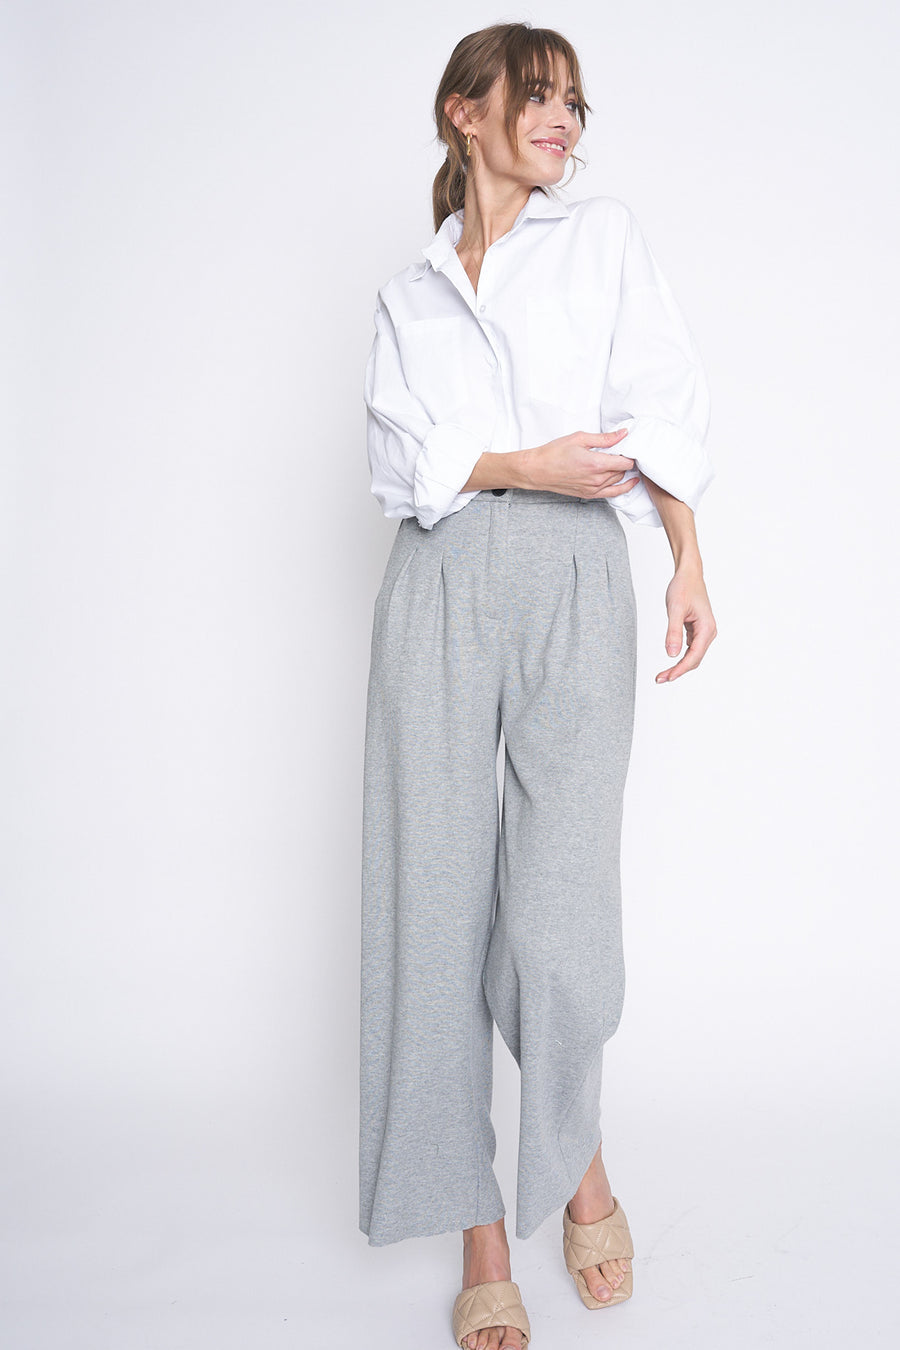 No Srcipt image - Images of 1 of 5 Heather Grey Wide Leg Sweat Pant